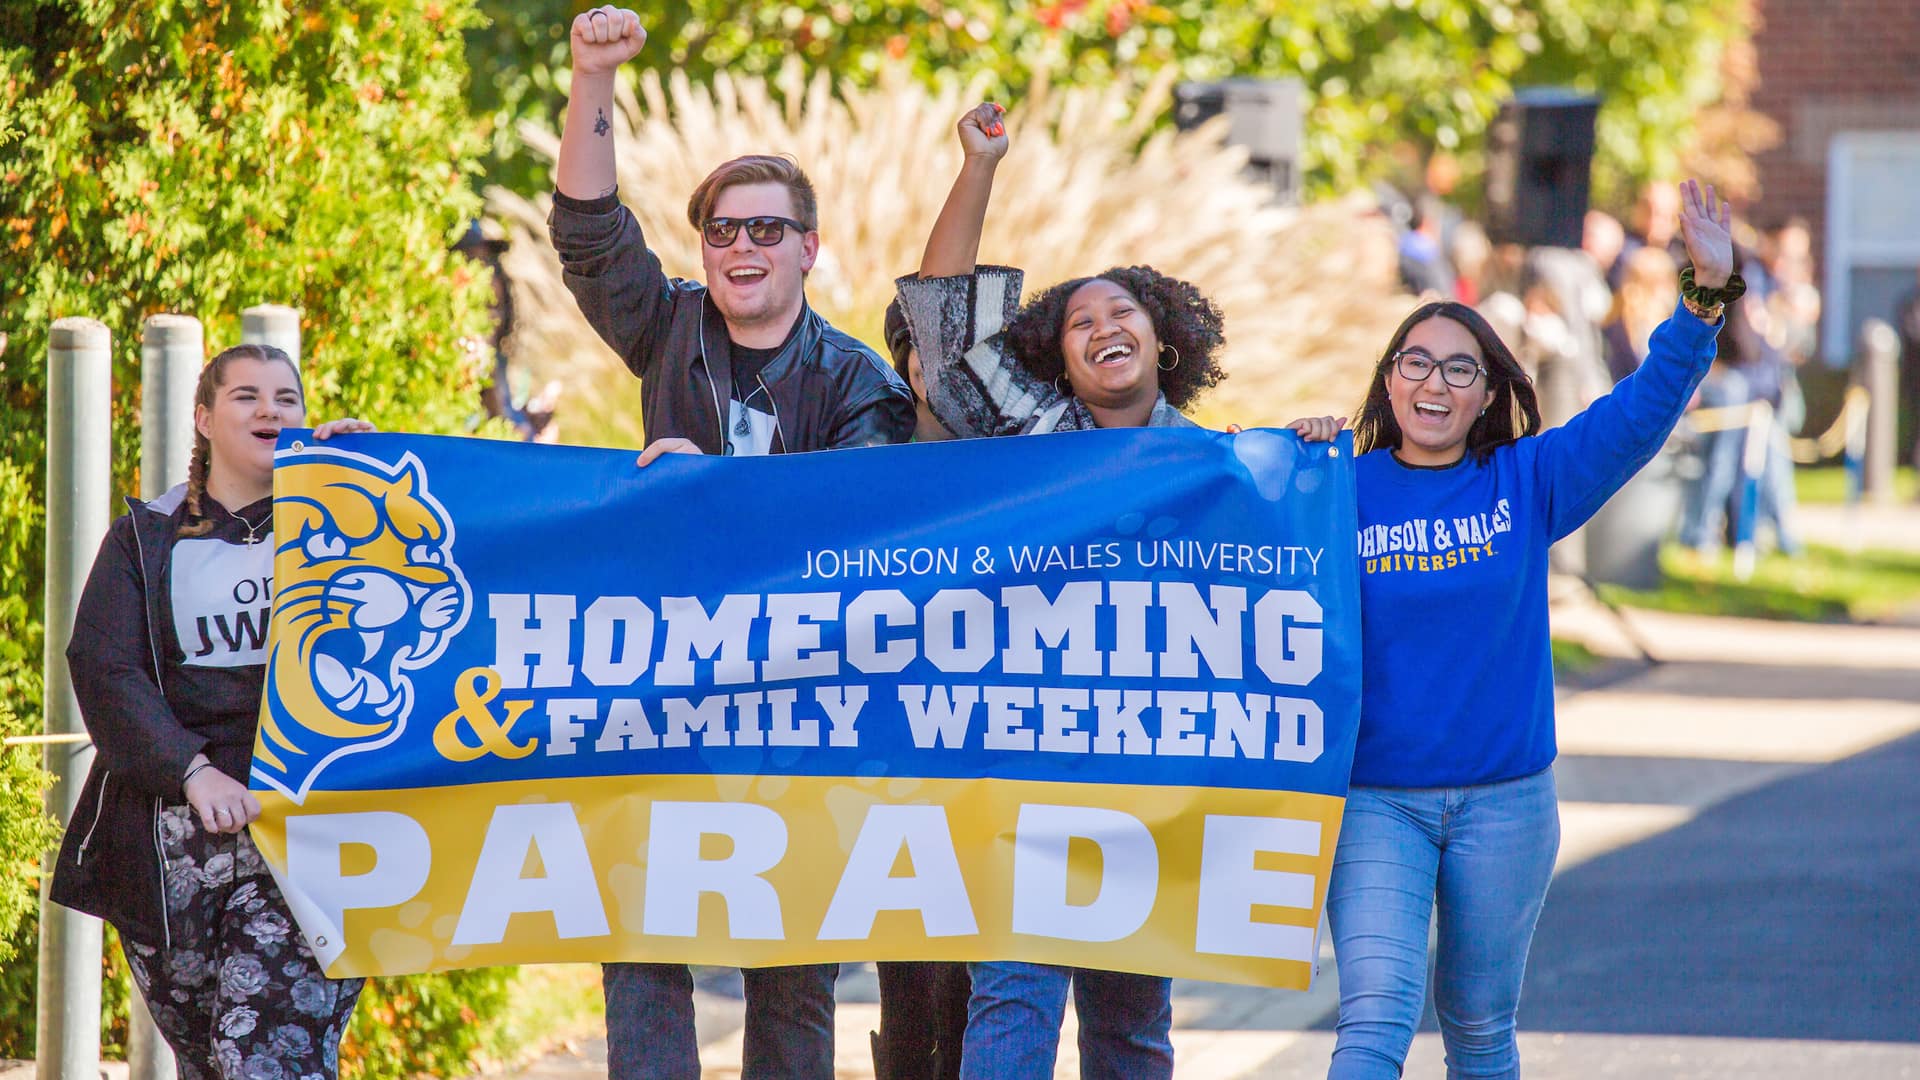 Homecoming & Family Weekend Parade